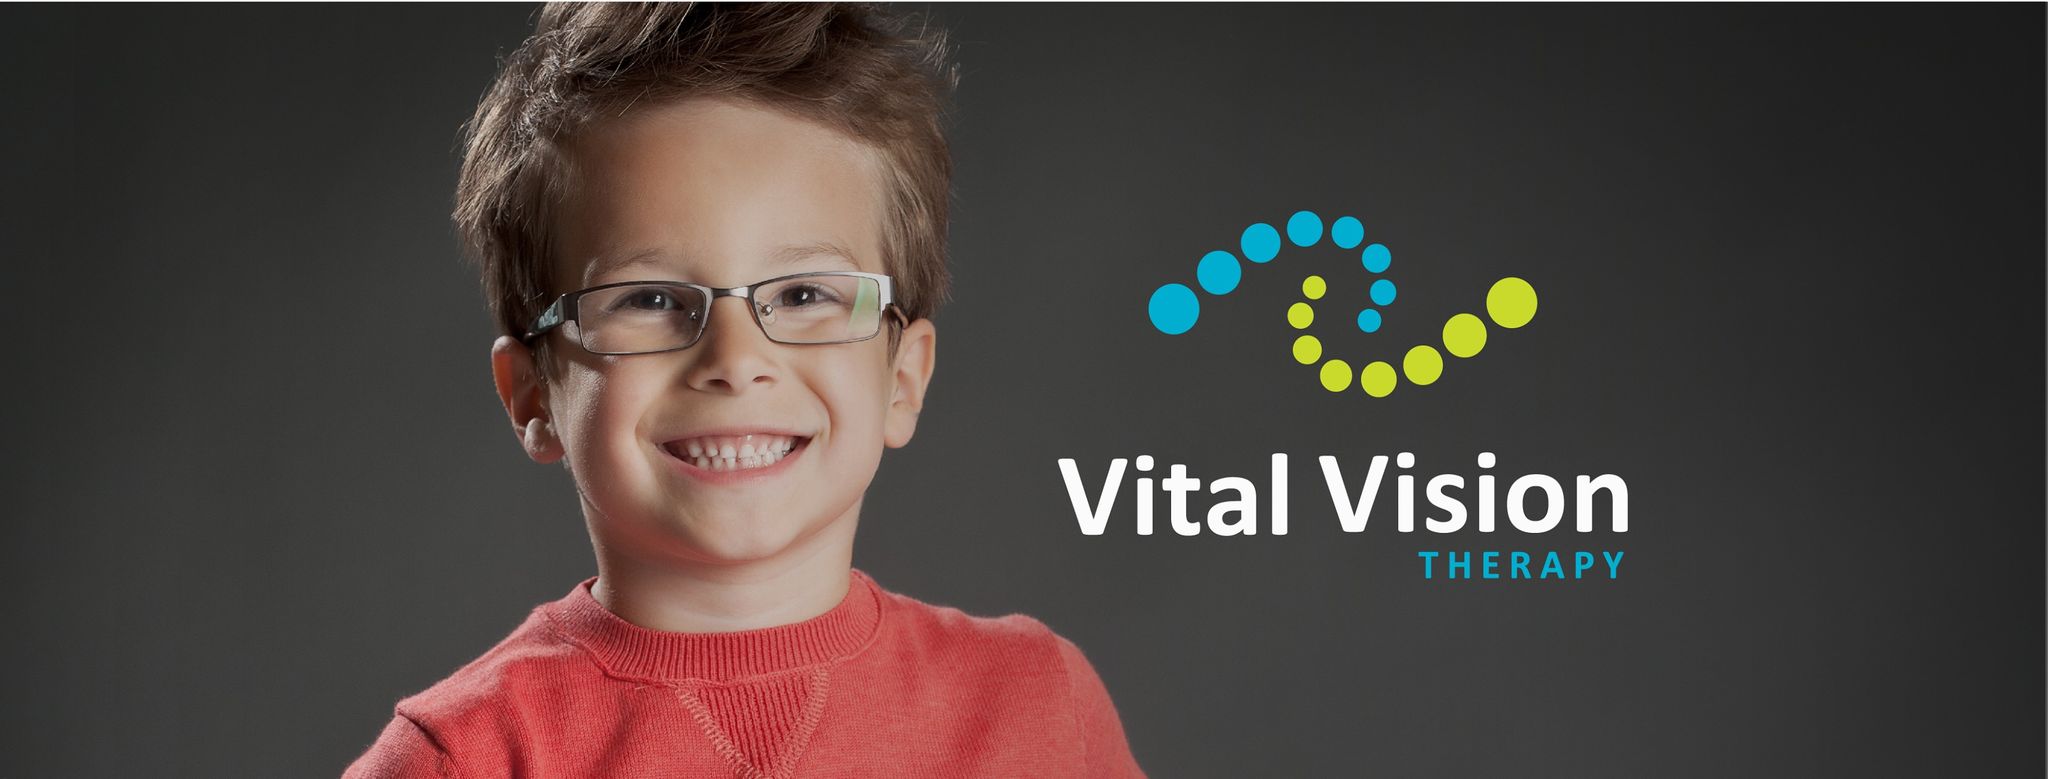 Vital Vision Therapy